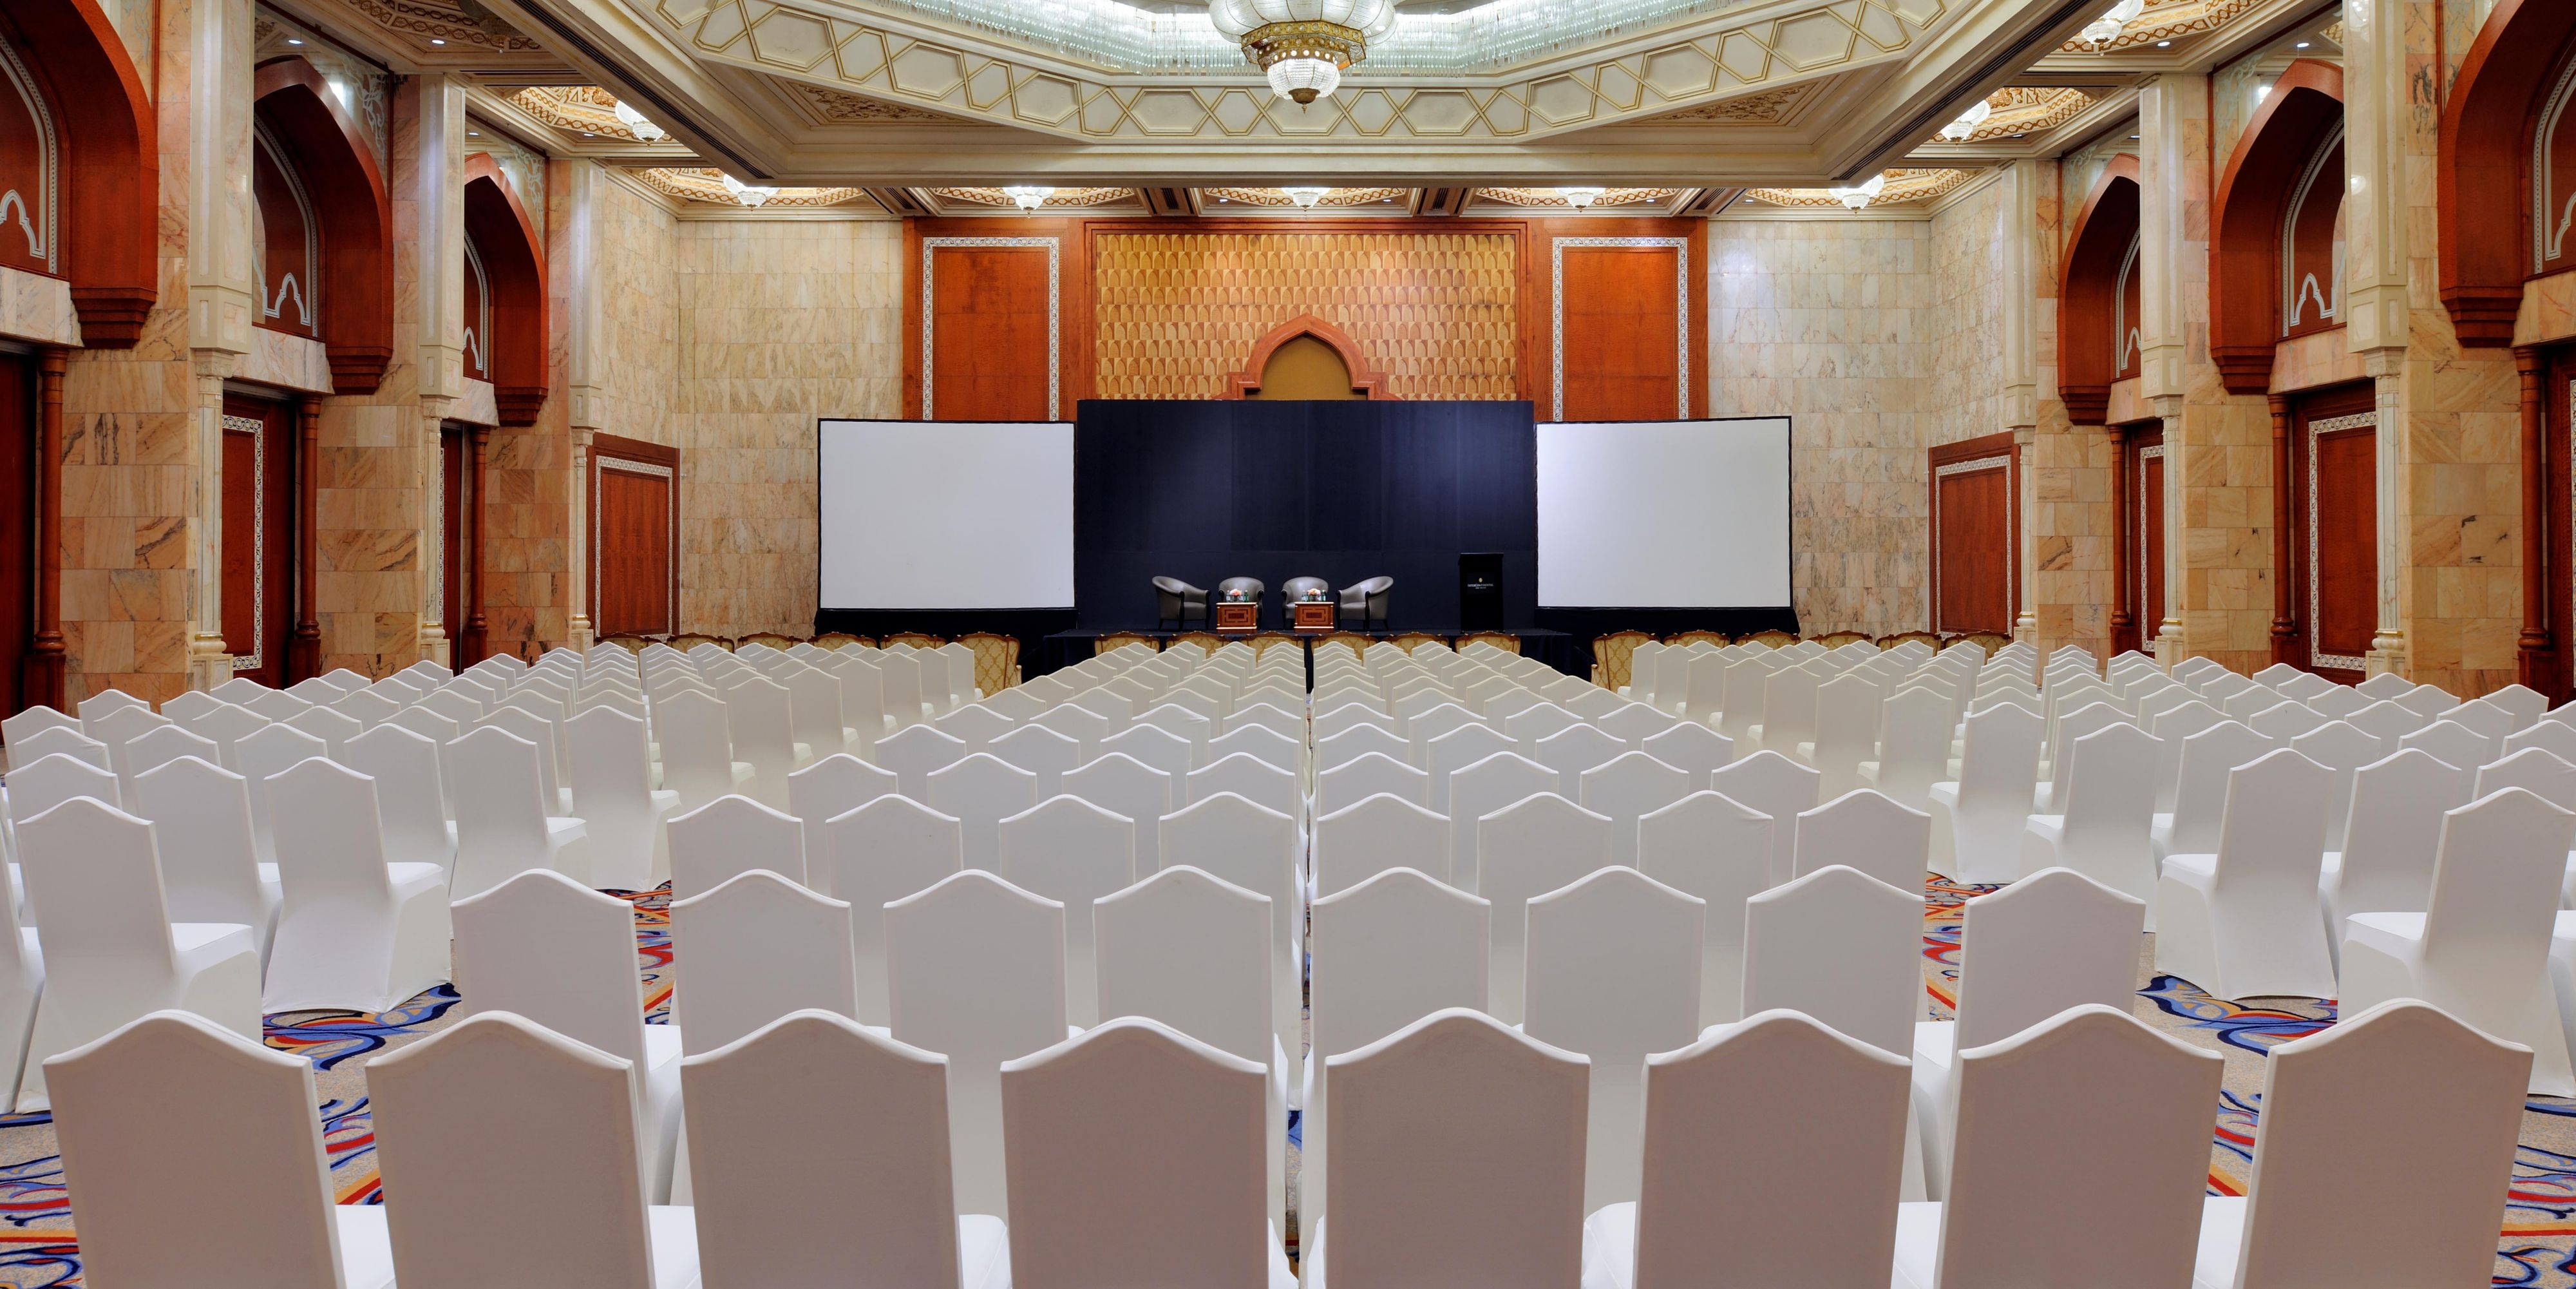 From intimate gatherings to more extravagant affairs, functions at InterContinental® Abu Dhabi set the standard in the UAE capital. With a range of stunning venues and an expert team of planners, we can tailor your event down to the very last detail. 